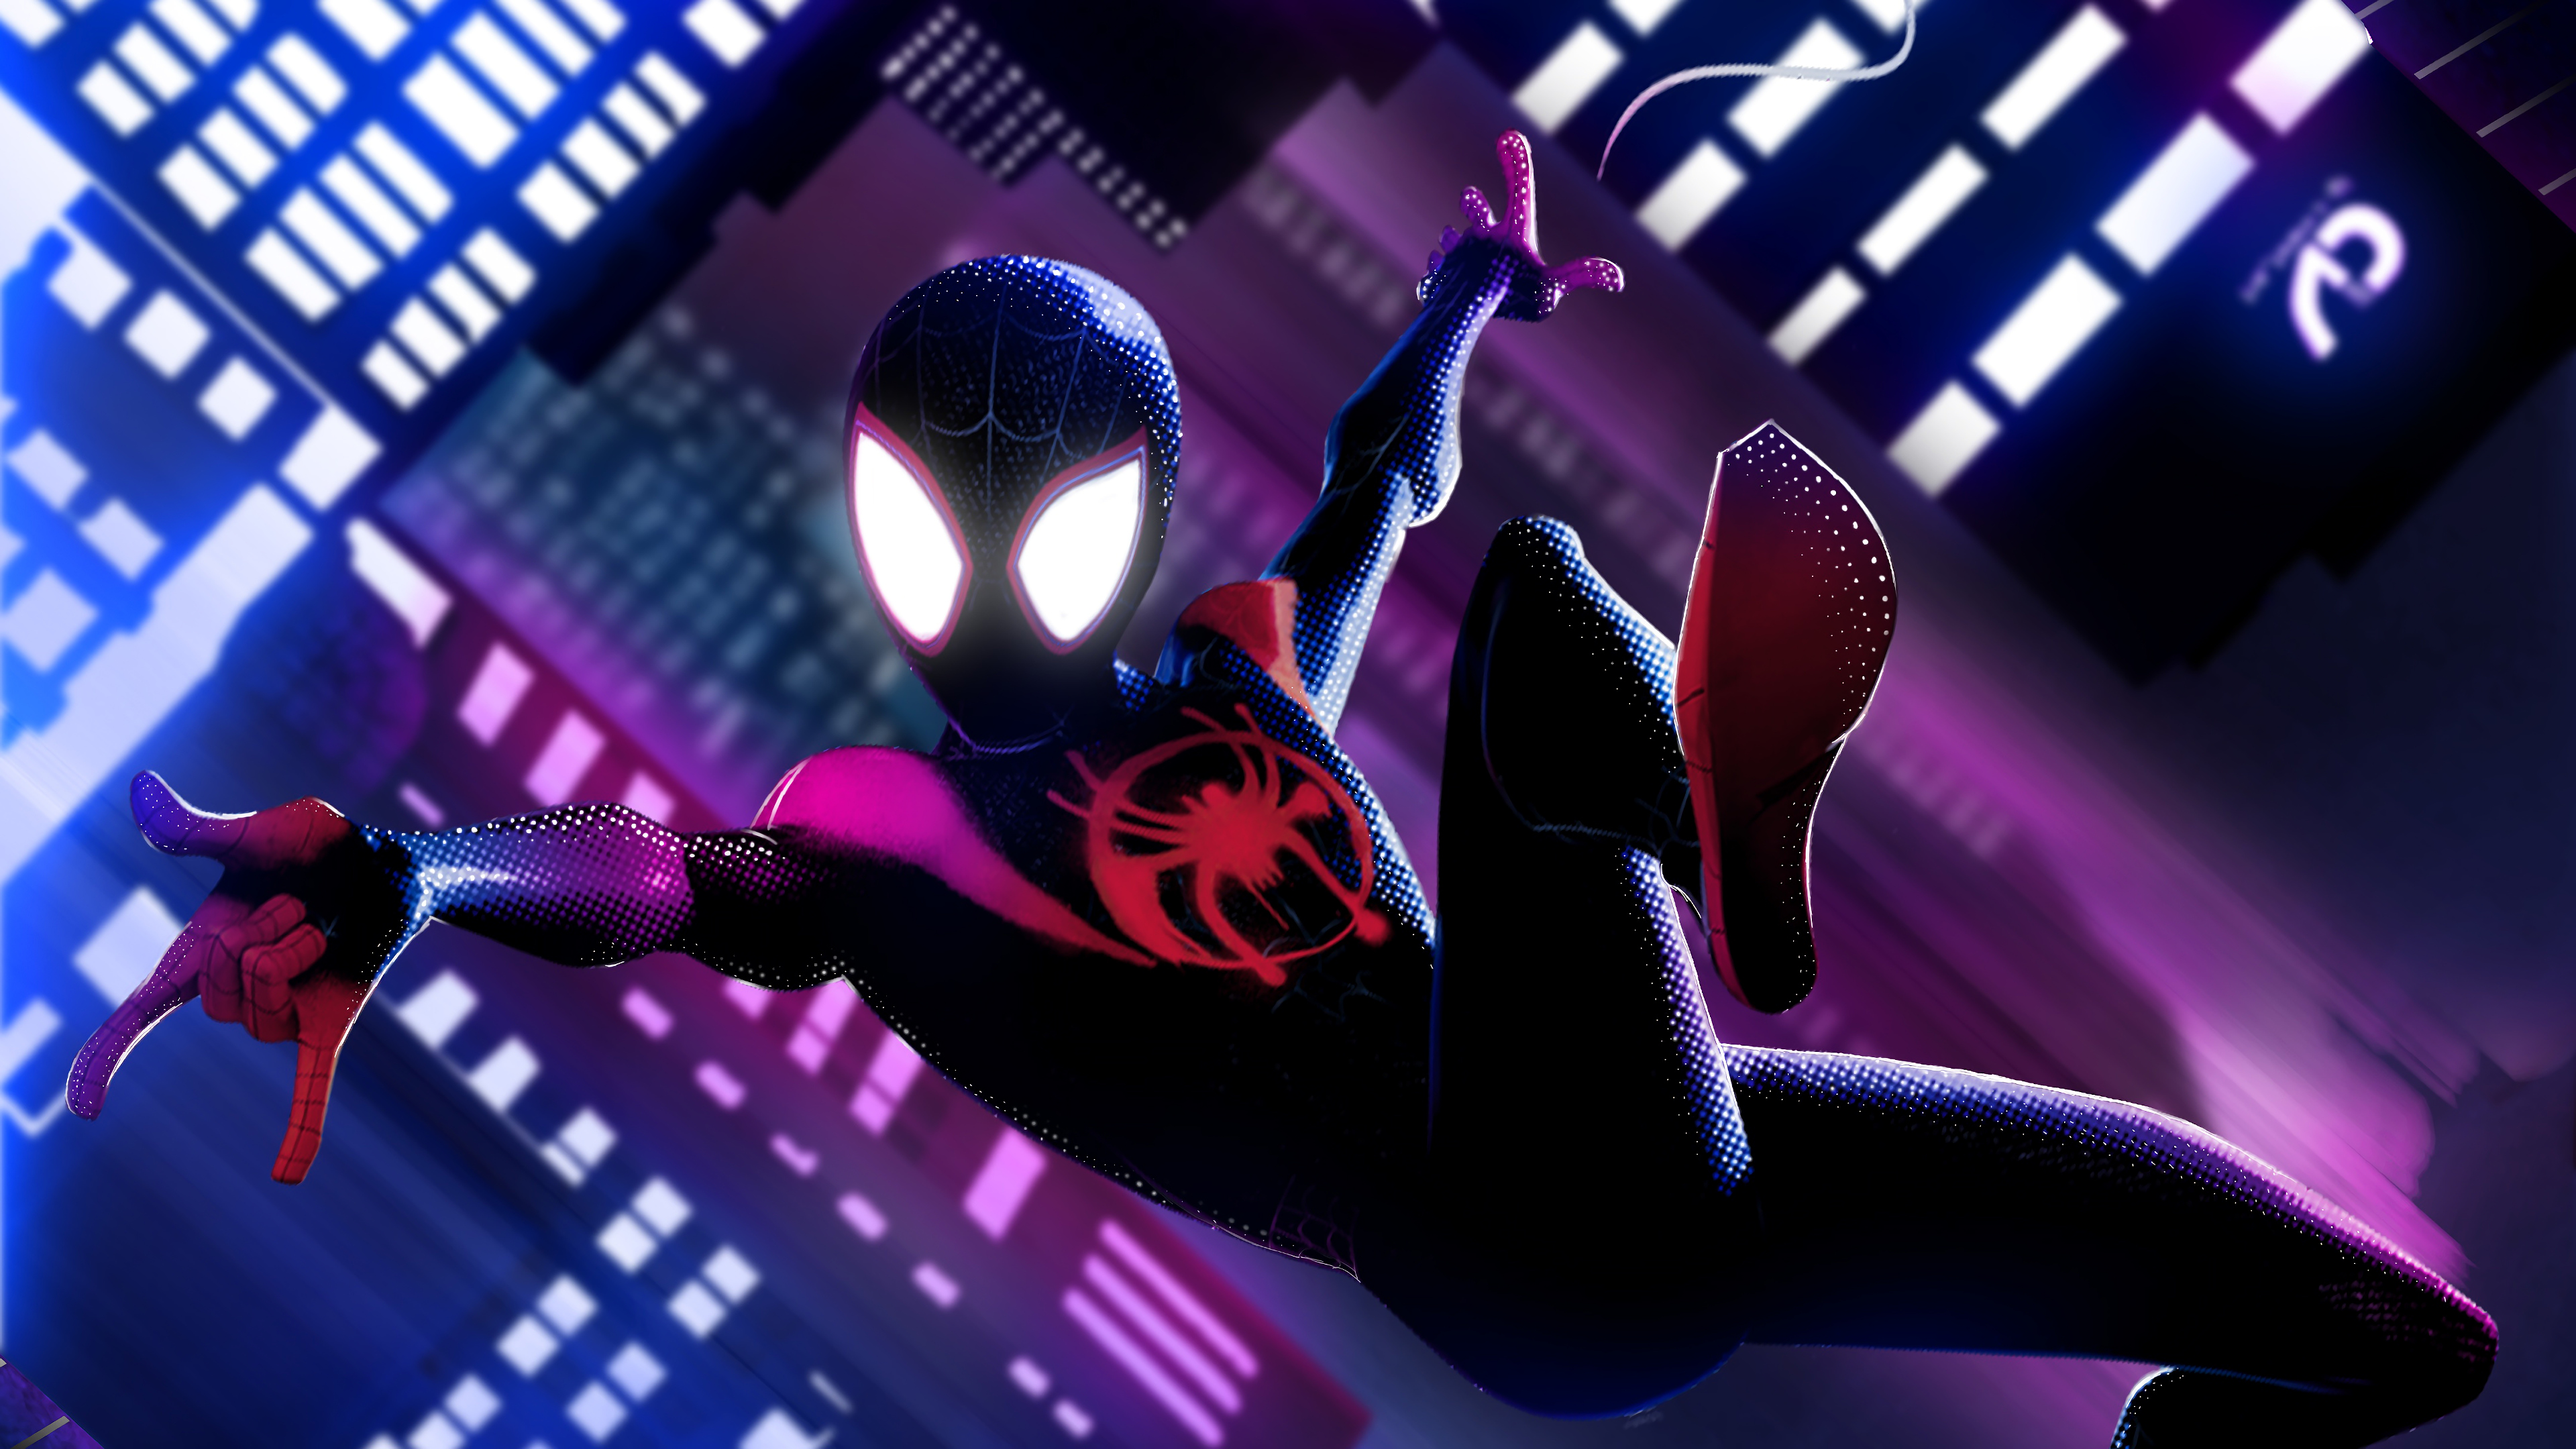 Miles Morales Spider-Man Into The Spider-Verse Wallpapers